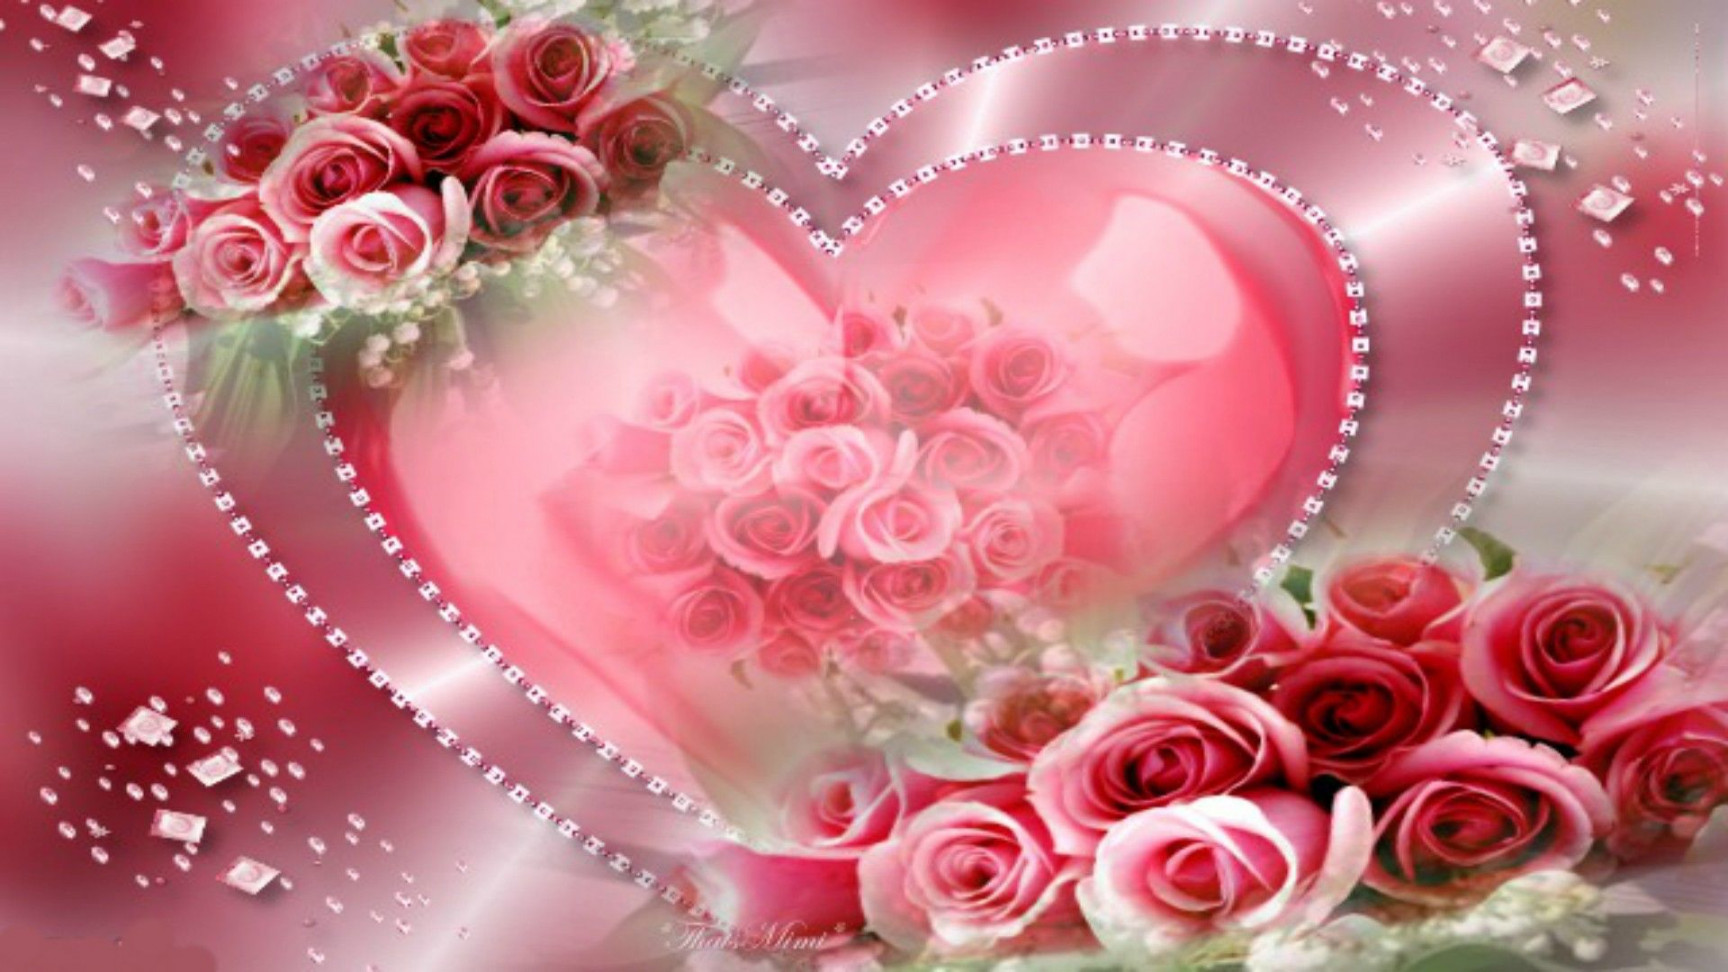 Hearts And Flowers Wallpapers For Mobile - Romantic Love Heart Rose - HD Wallpaper 